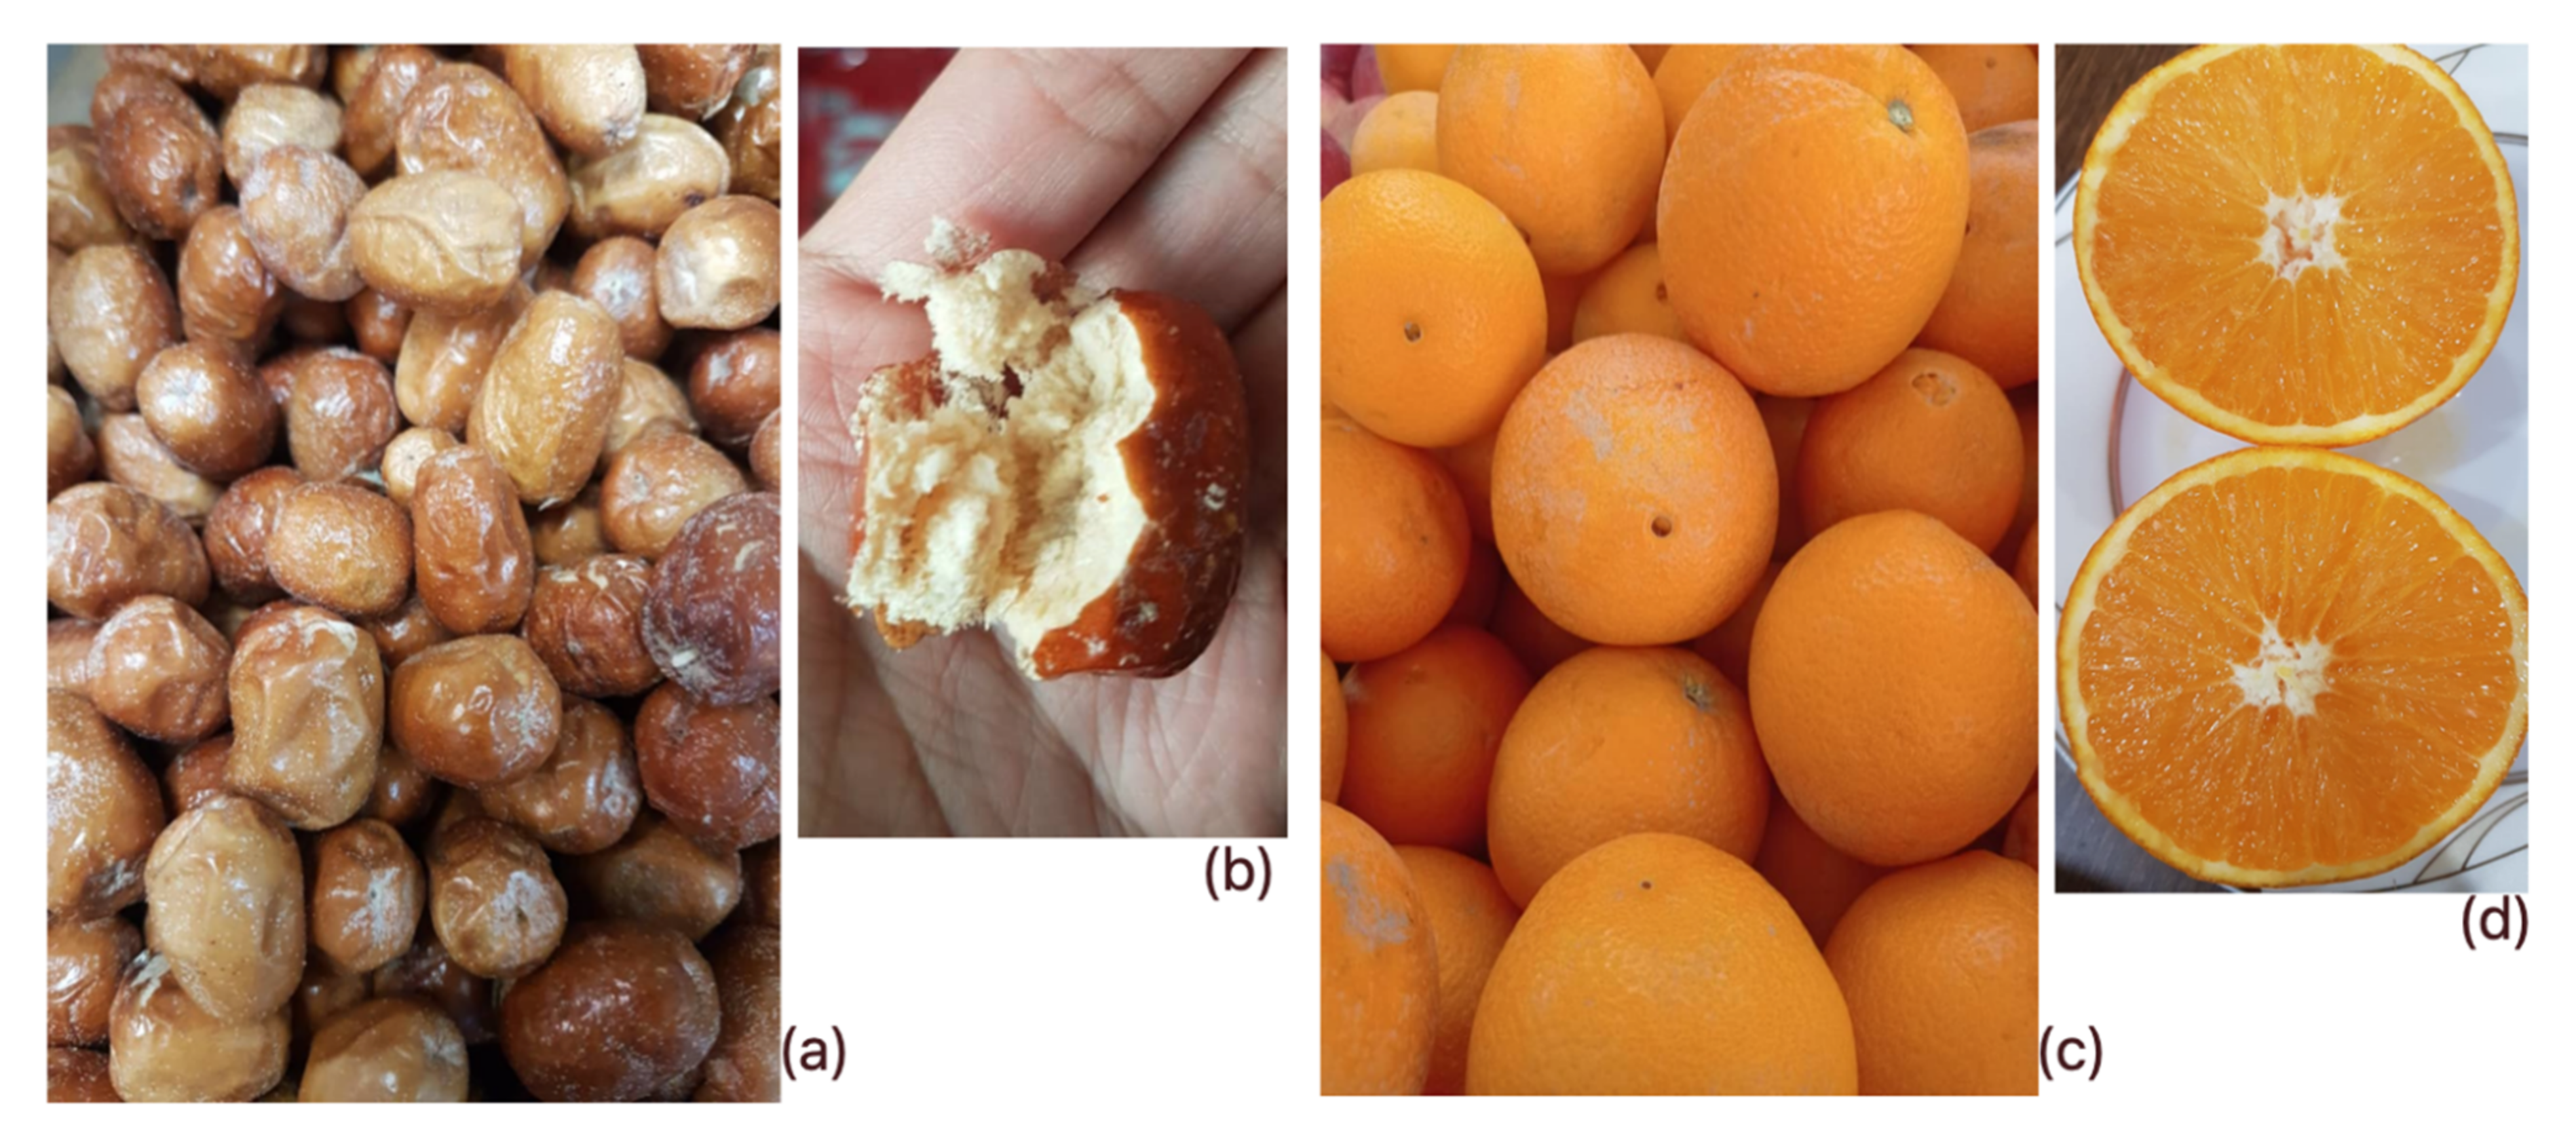 Full article: Blood orange (Citrus sinensis) as a rich source of  nutraceuticals: investigation of bioactive compounds in different parts of  the fruit by HPLC-PDA/MS